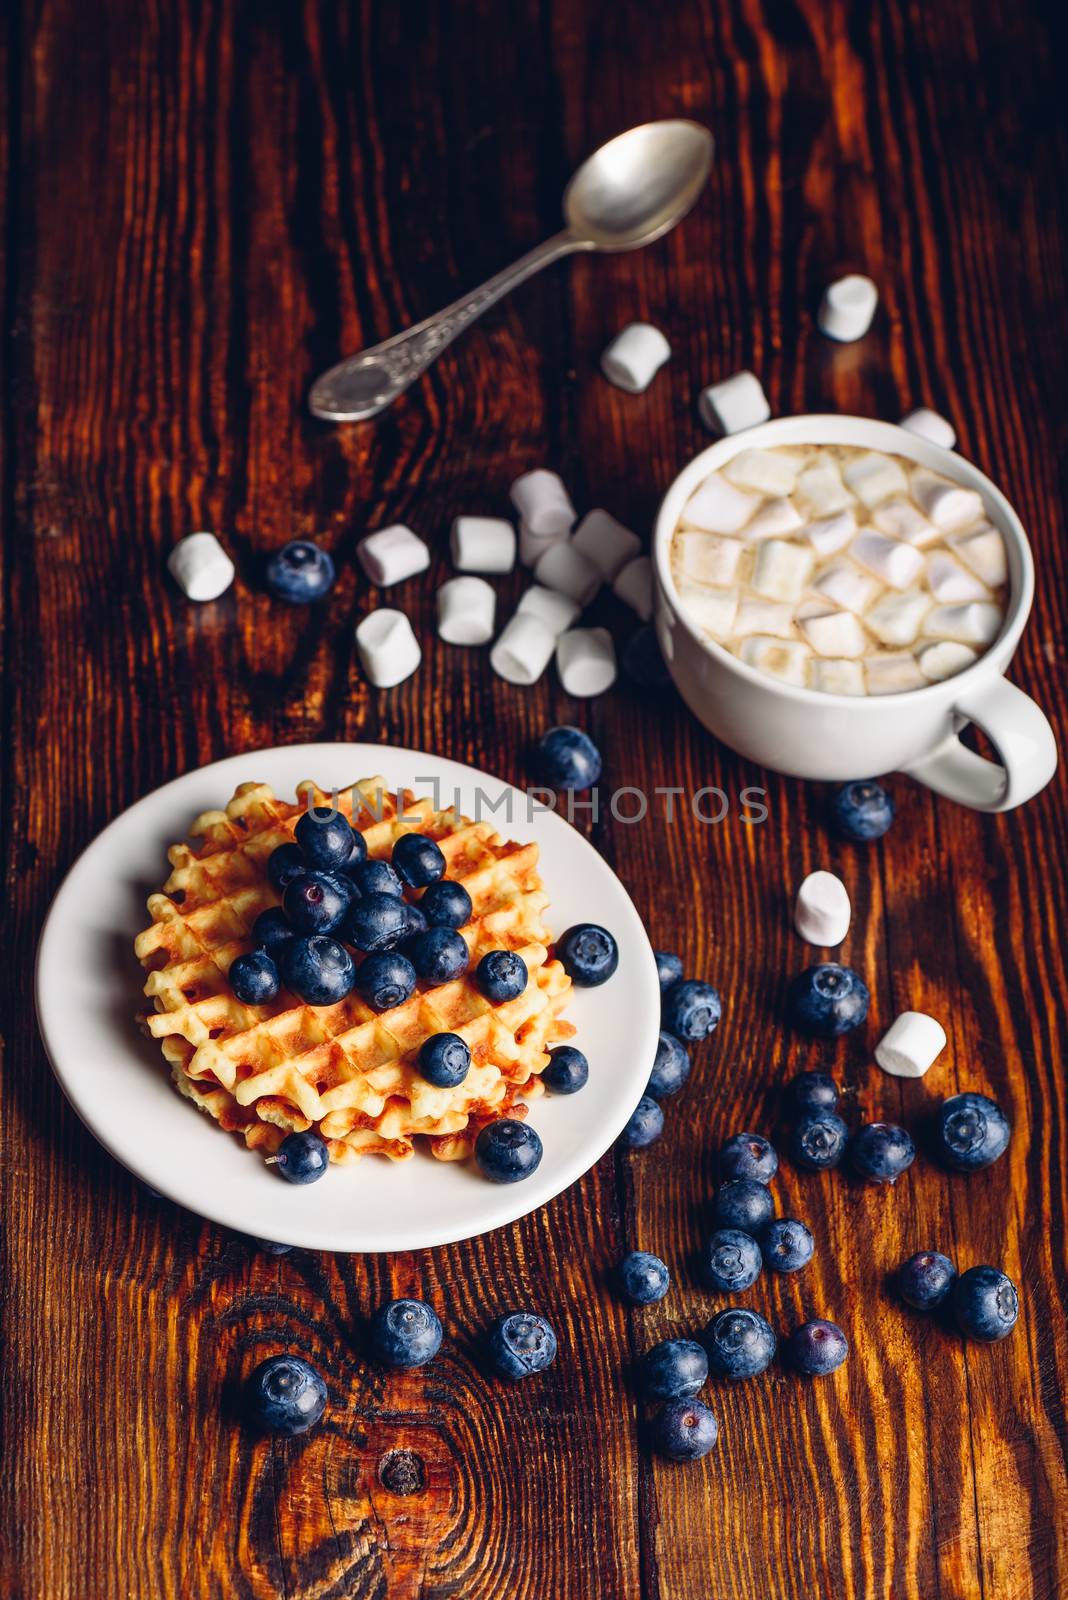 Homemade Waffles on Plate with Fresh Blueberry and Cup of Hot Cocoa with Marshmallow. Vertical orientation.